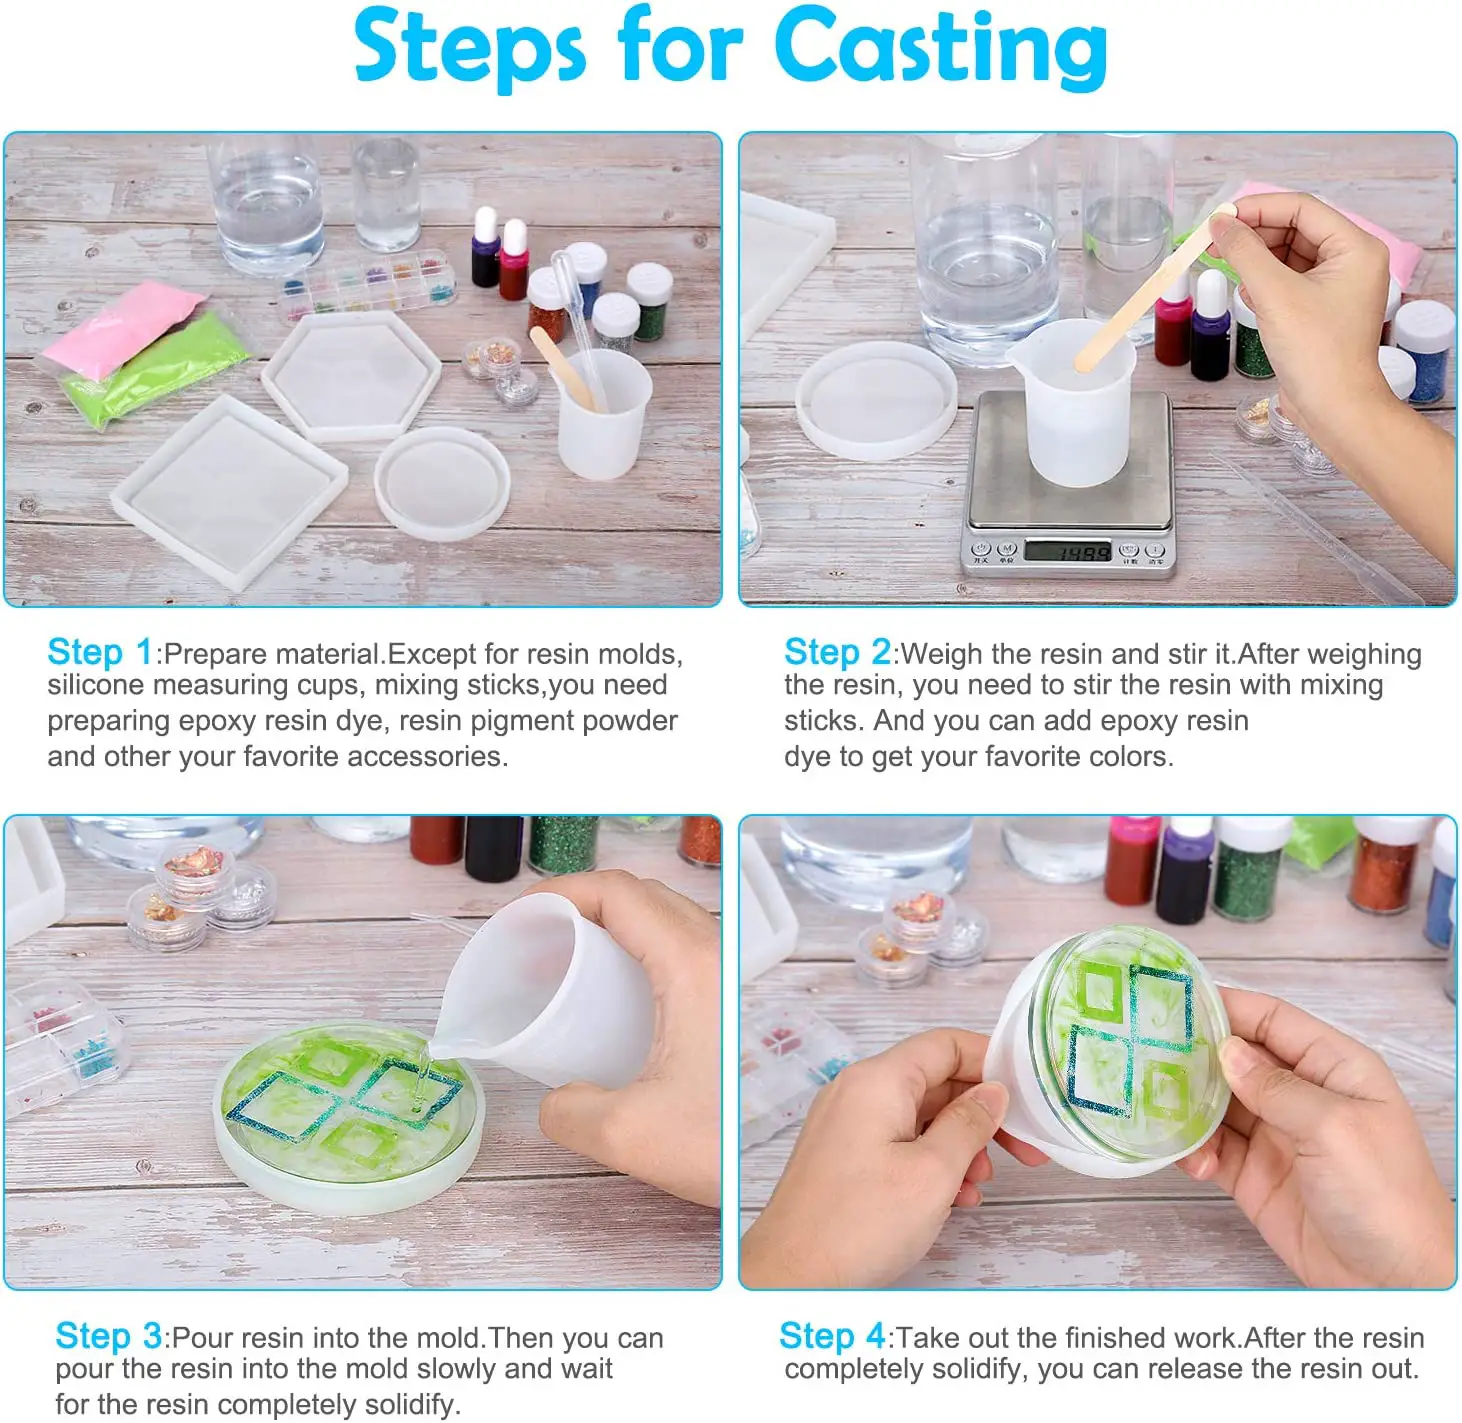 Epoxy Mold Release Diy : How To Make Silicone Molds For Resin Step By ...